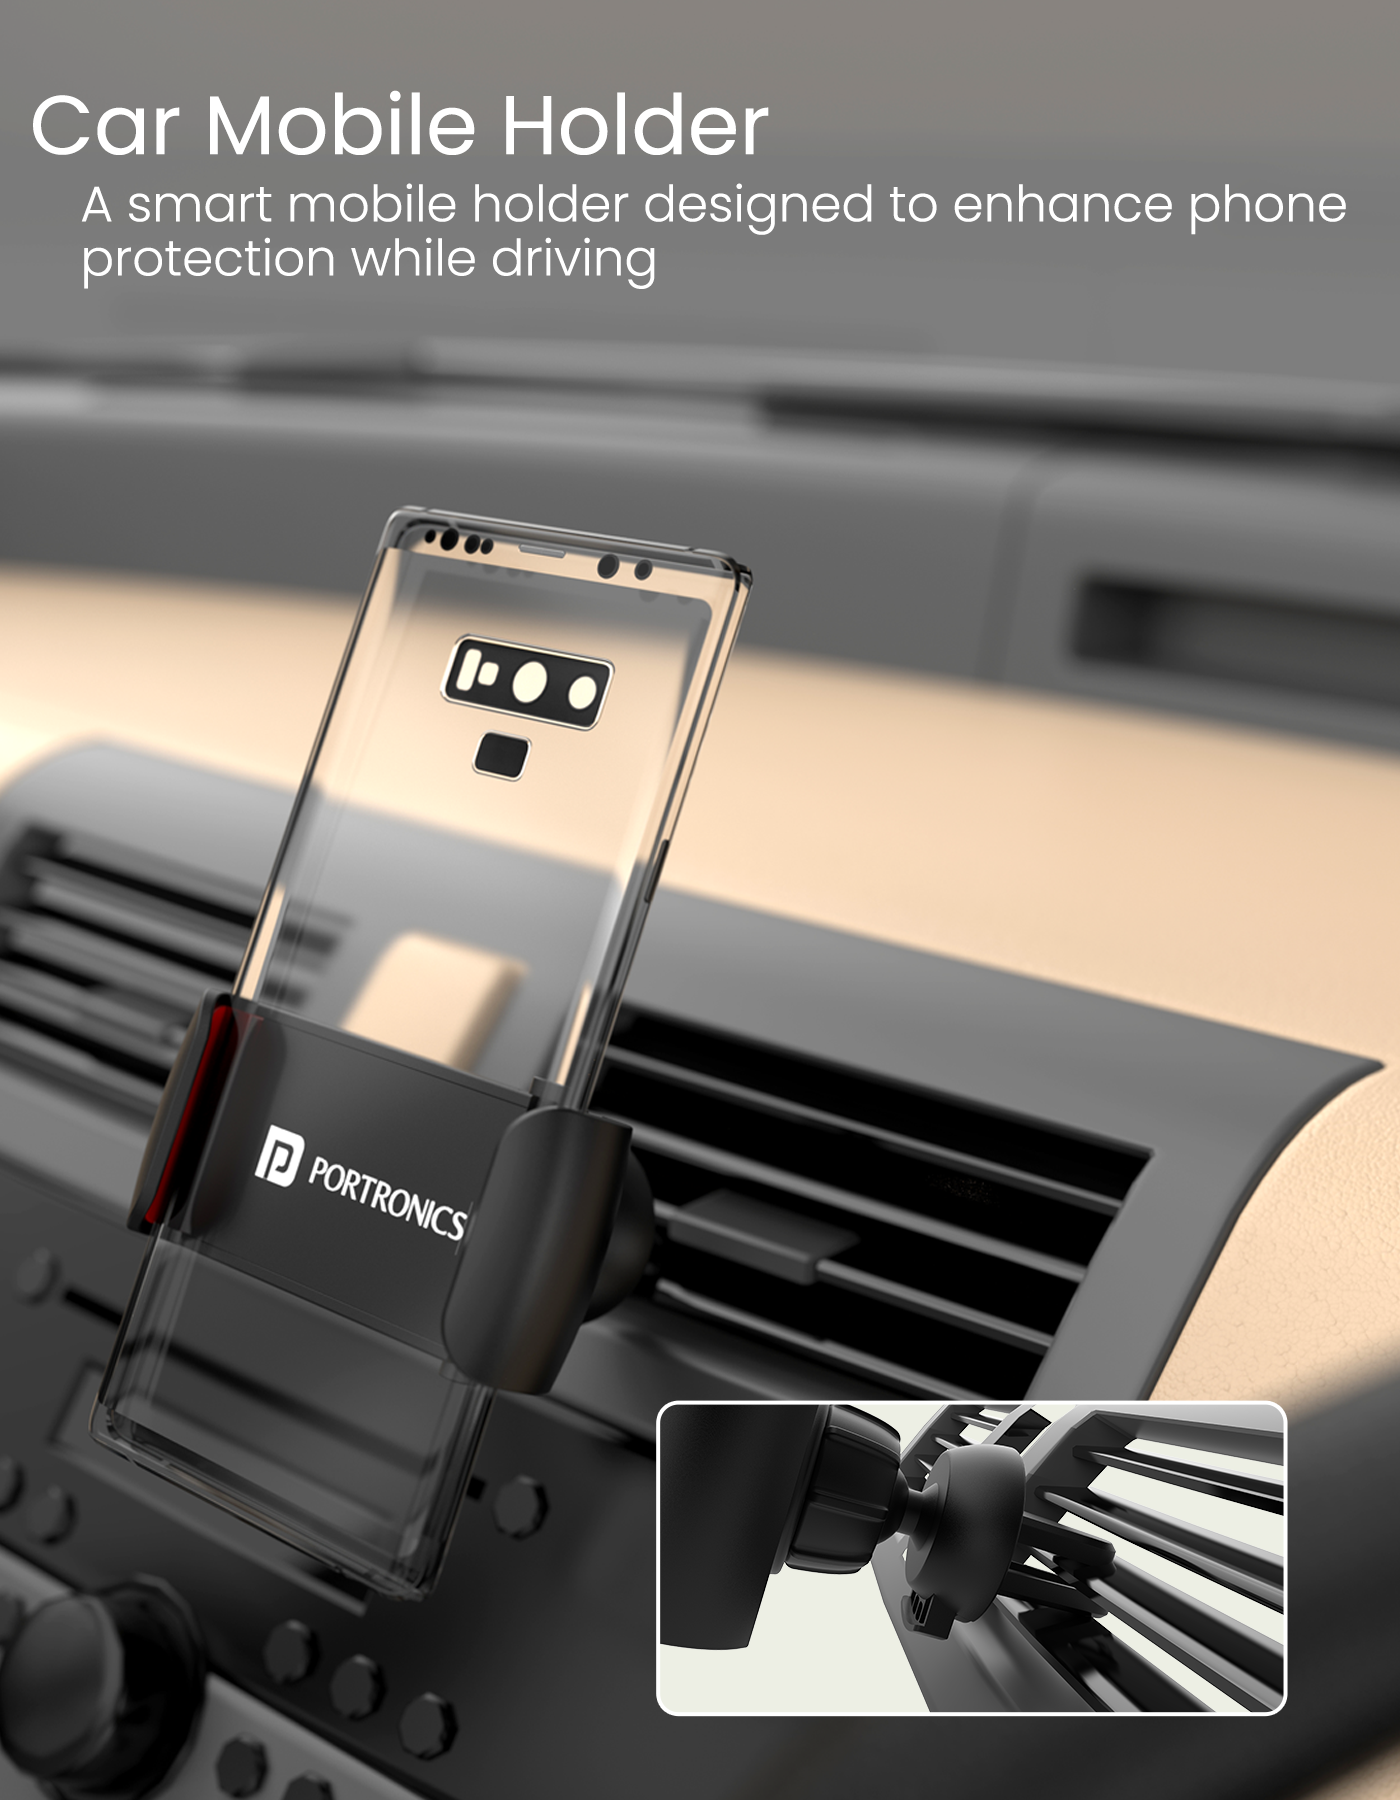 Portronics Clamp 2 car Mobile Holder/stand with a 360-degree rotational improved compatibility